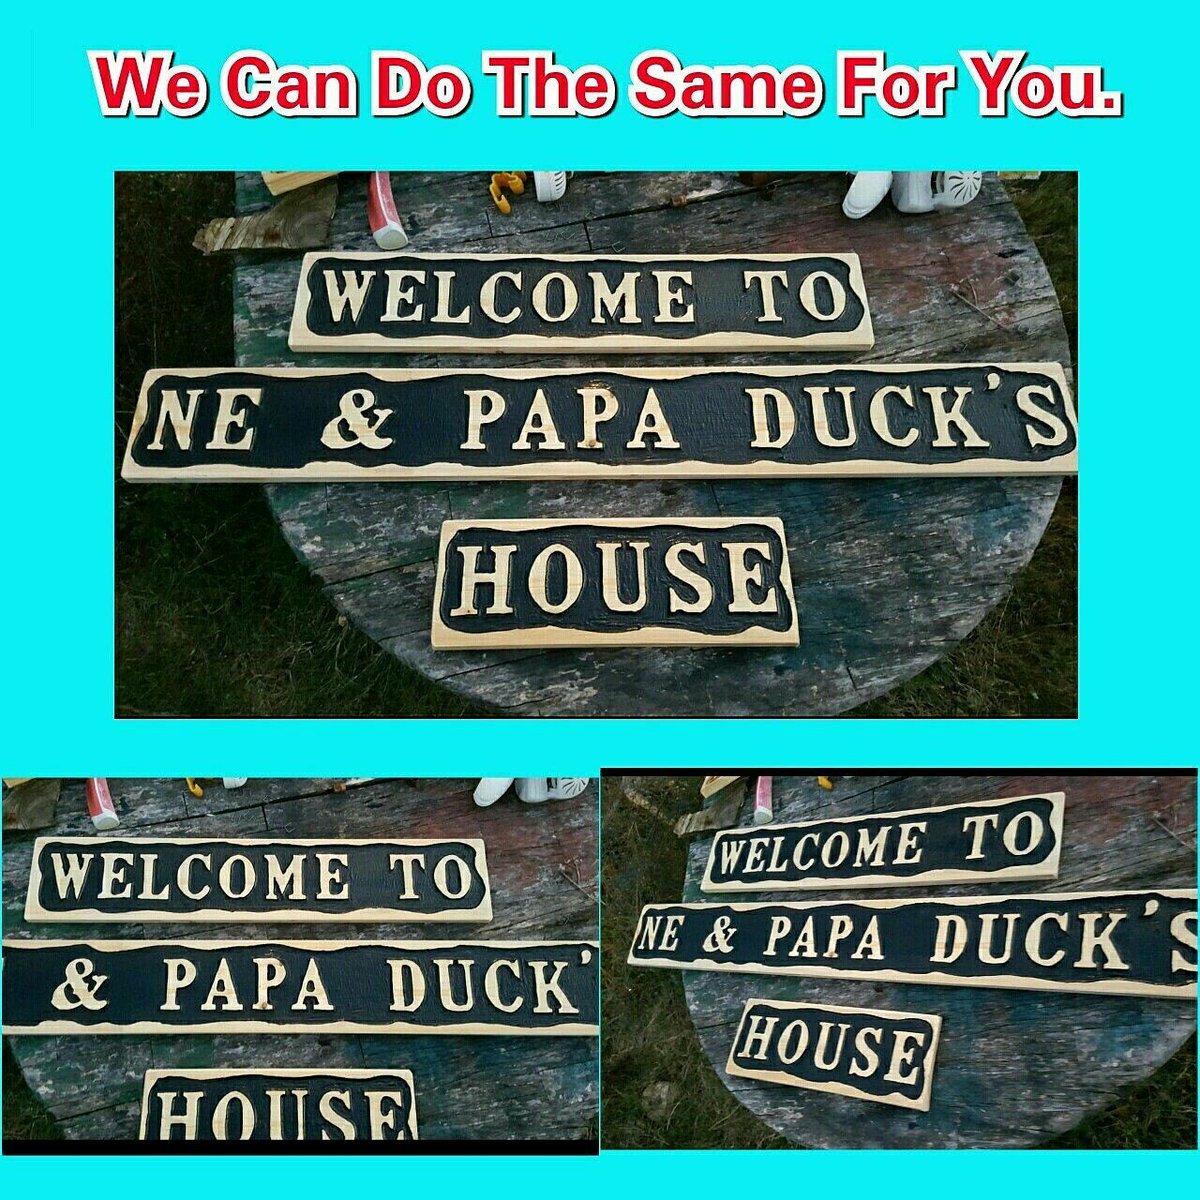 Visit our shop at freeonme1.etsy.com #woodworking #handcraftedsigns #etsyseller #woodsignsoftexas